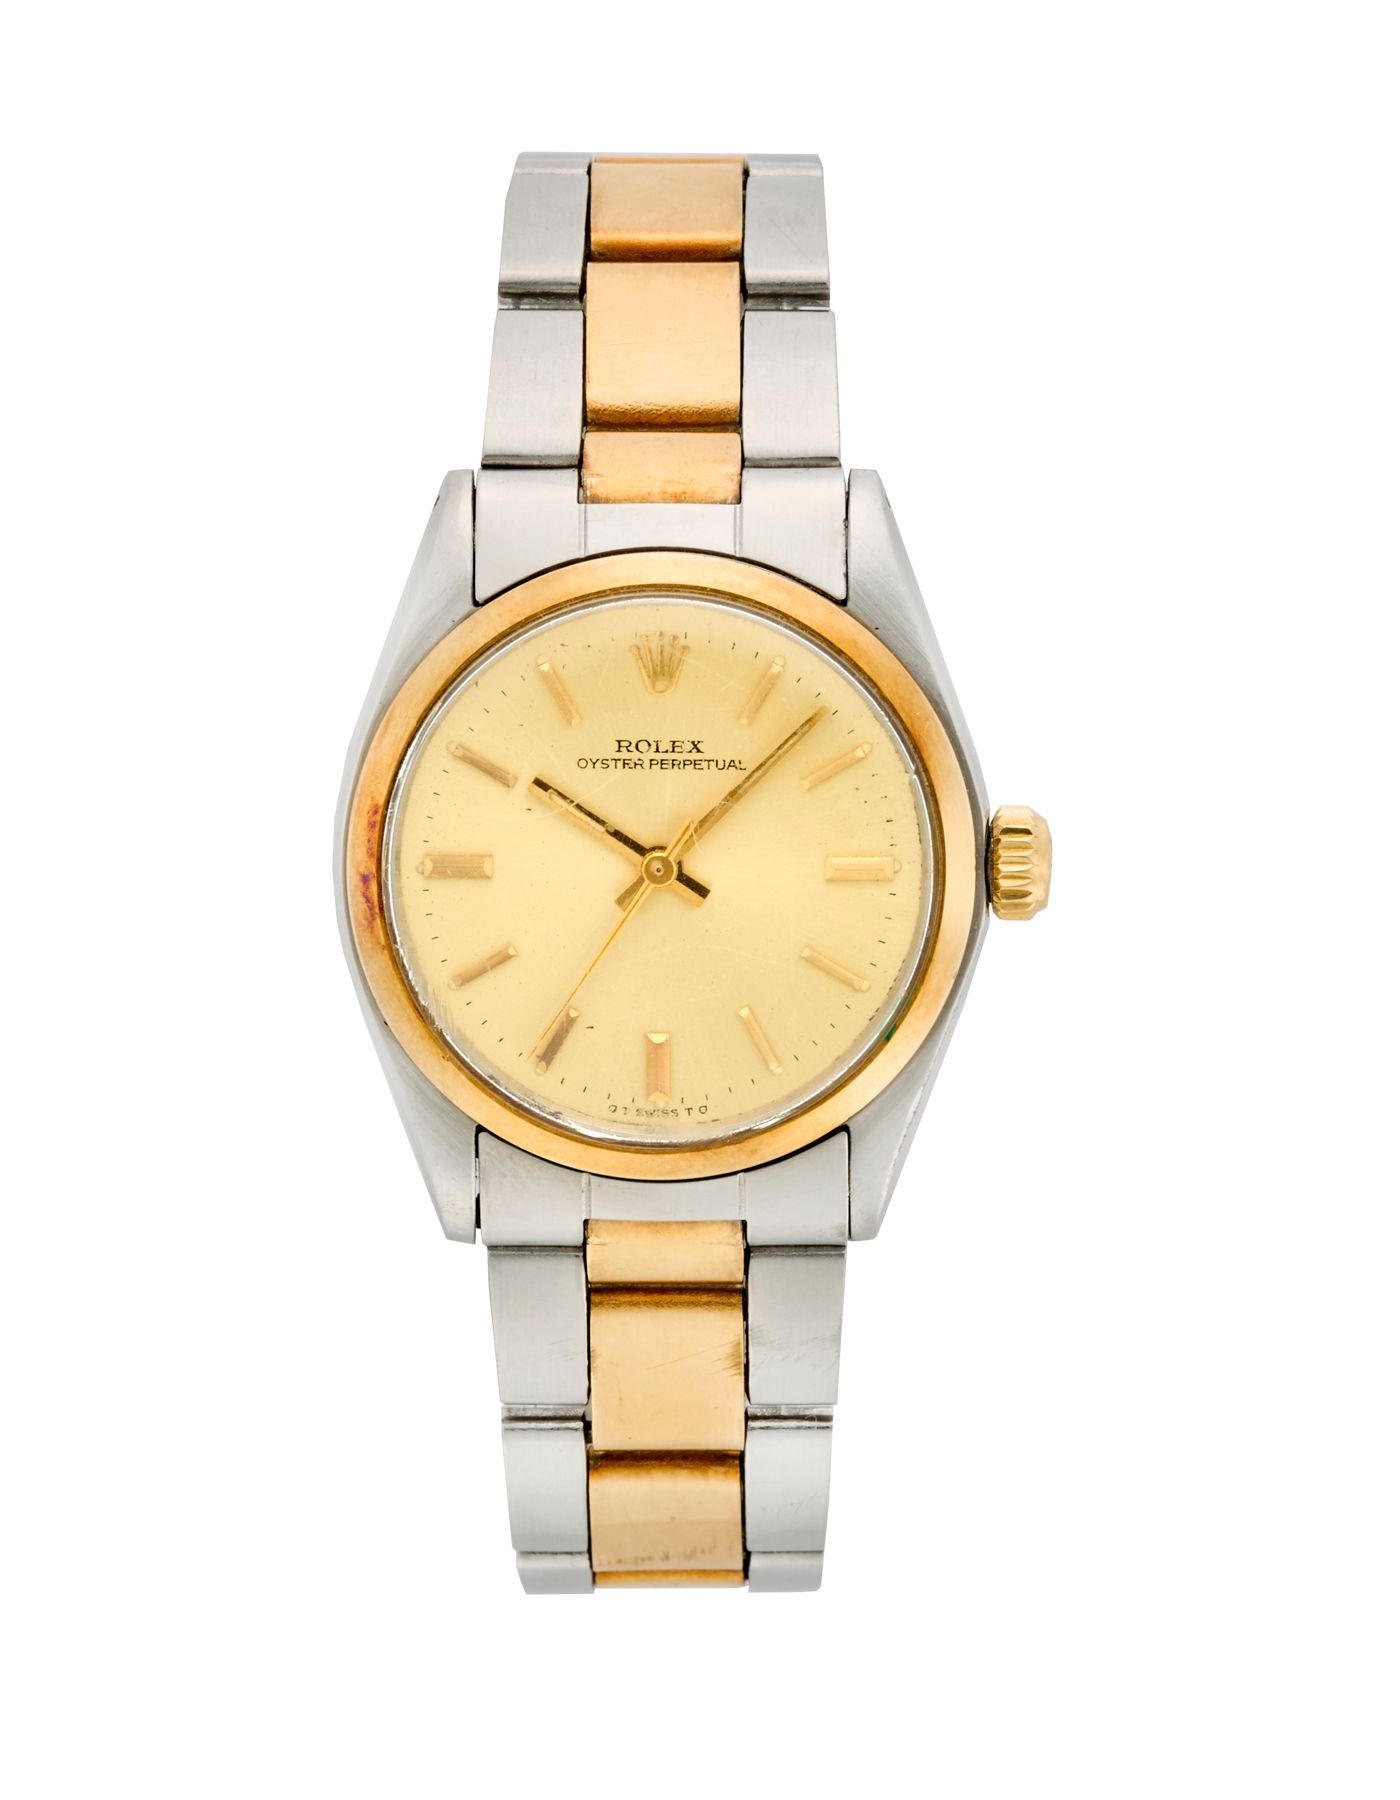 Null Rolex, Oyster Perpetual Ref. 6748
Gent's steel and gold wristwatch
Year 197&hellip;